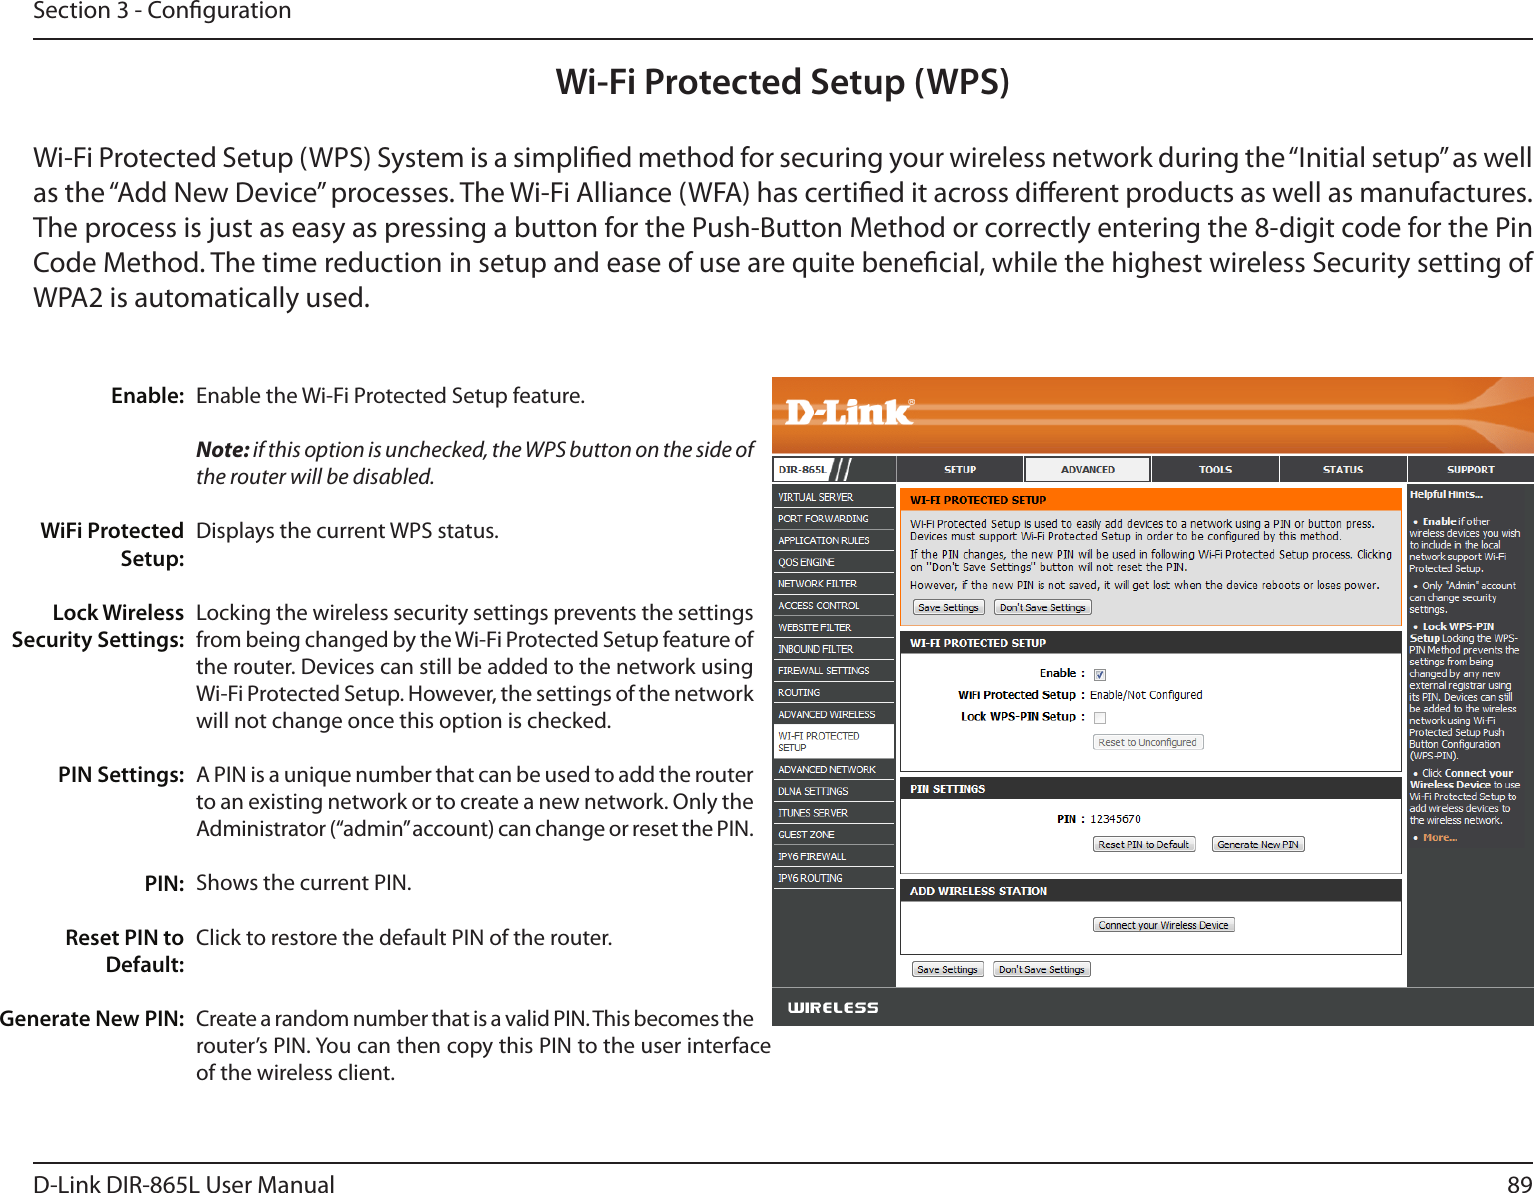 89D-Link DIR-865L User ManualSection 3 - CongurationWi-Fi Protected Setup (WPS)Enable the Wi-Fi Protected Setup feature. Note: if this option is unchecked, the WPS button on the side of the router will be disabled.Displays the current WPS status.Locking the wireless security settings prevents the settings from being changed by the Wi-Fi Protected Setup feature of the router. Devices can still be added to the network using Wi-Fi Protected Setup. However, the settings of the network will not change once this option is checked. A PIN is a unique number that can be used to add the router to an existing network or to create a new network. Only the Administrator (“admin” account) can change or reset the PIN. Shows the current PIN. Click to restore the default PIN of the router. Create a random number that is a valid PIN. This becomes the router’s PIN. You can then copy this PIN to the user interface of the wireless client.Enable:WiFi Protected Setup:Lock Wireless Security Settings:PIN Settings:PIN:Reset PIN to Default:Generate New PIN:Wi-Fi Protected Setup (WPS) System is a simplied method for securing your wireless network during the “Initial setup” as well as the “Add New Device” processes. The Wi-Fi Alliance (WFA) has certied it across dierent products as well as manufactures. The process is just as easy as pressing a button for the Push-Button Method or correctly entering the 8-digit code for the Pin Code Method. The time reduction in setup and ease of use are quite benecial, while the highest wireless Security setting of WPA2 is automatically used.